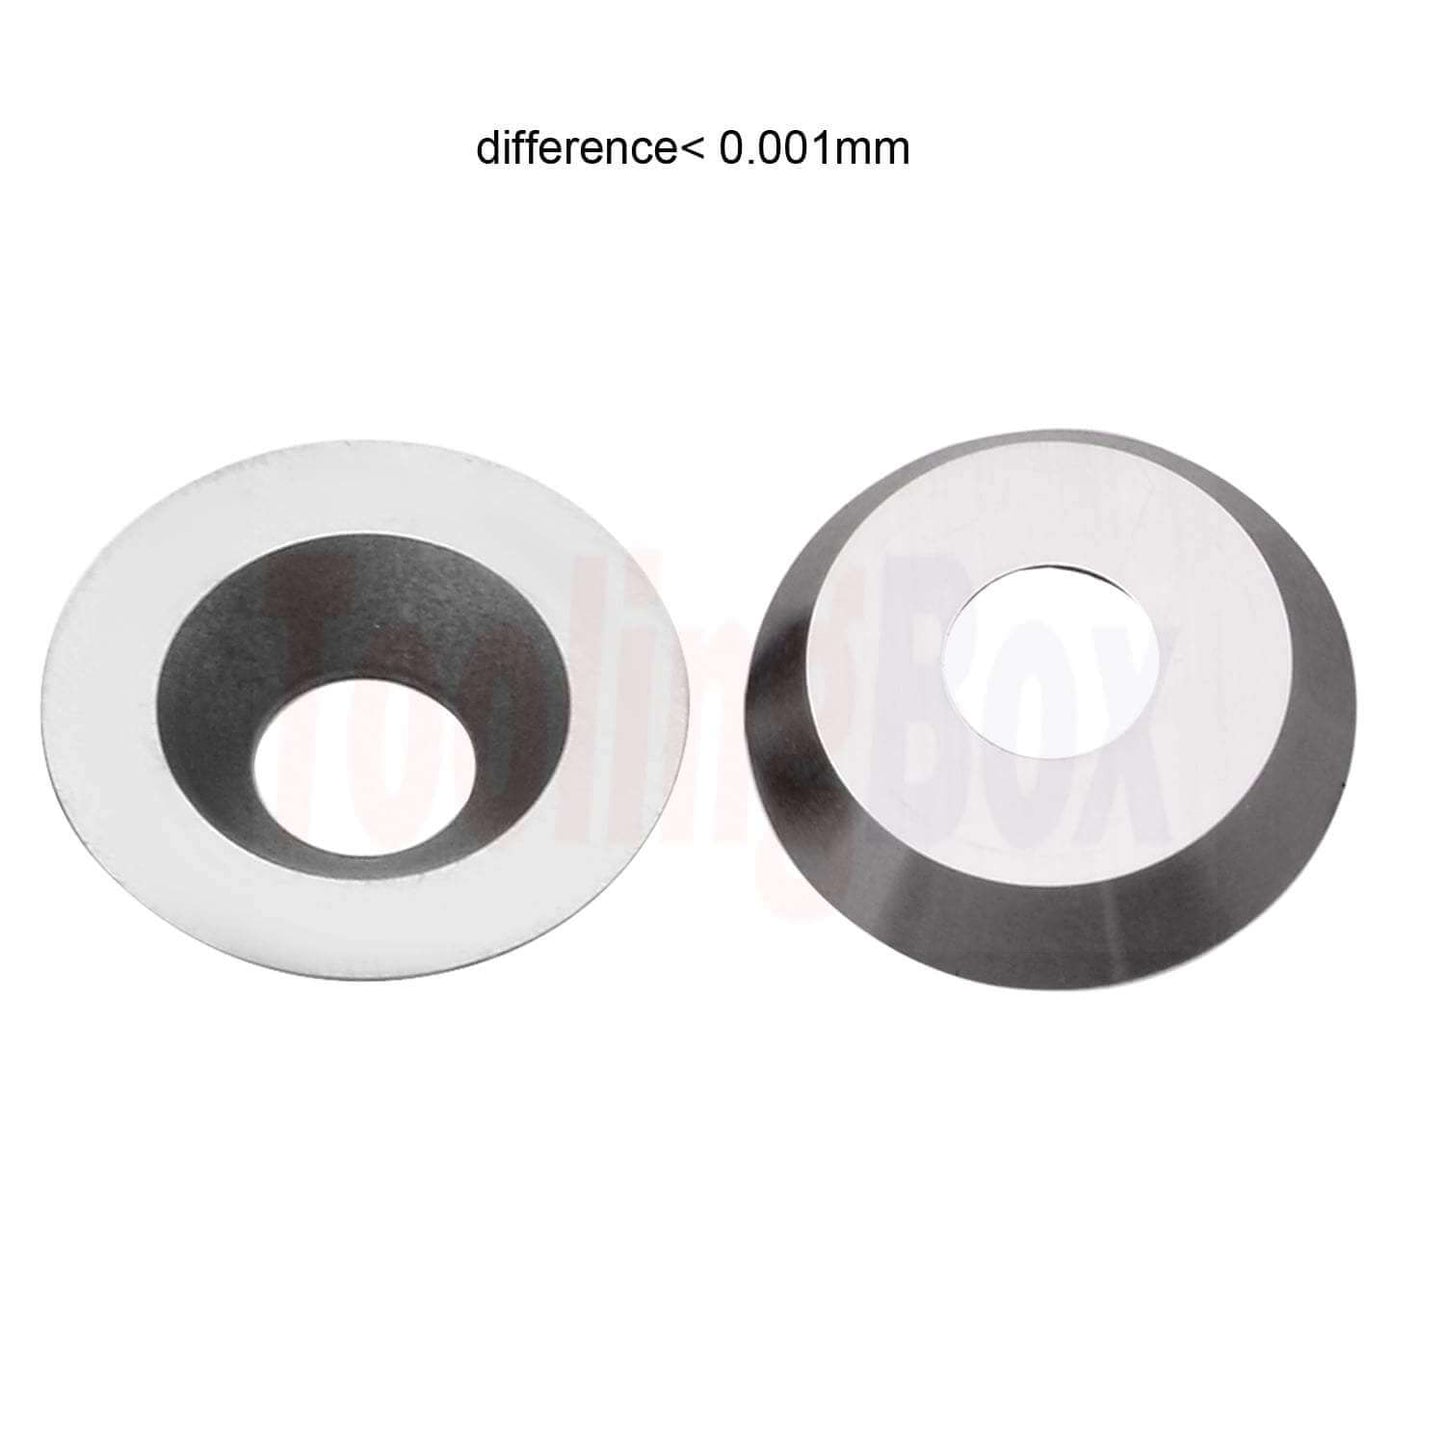 difference for ToolingBox Round carbide cutter